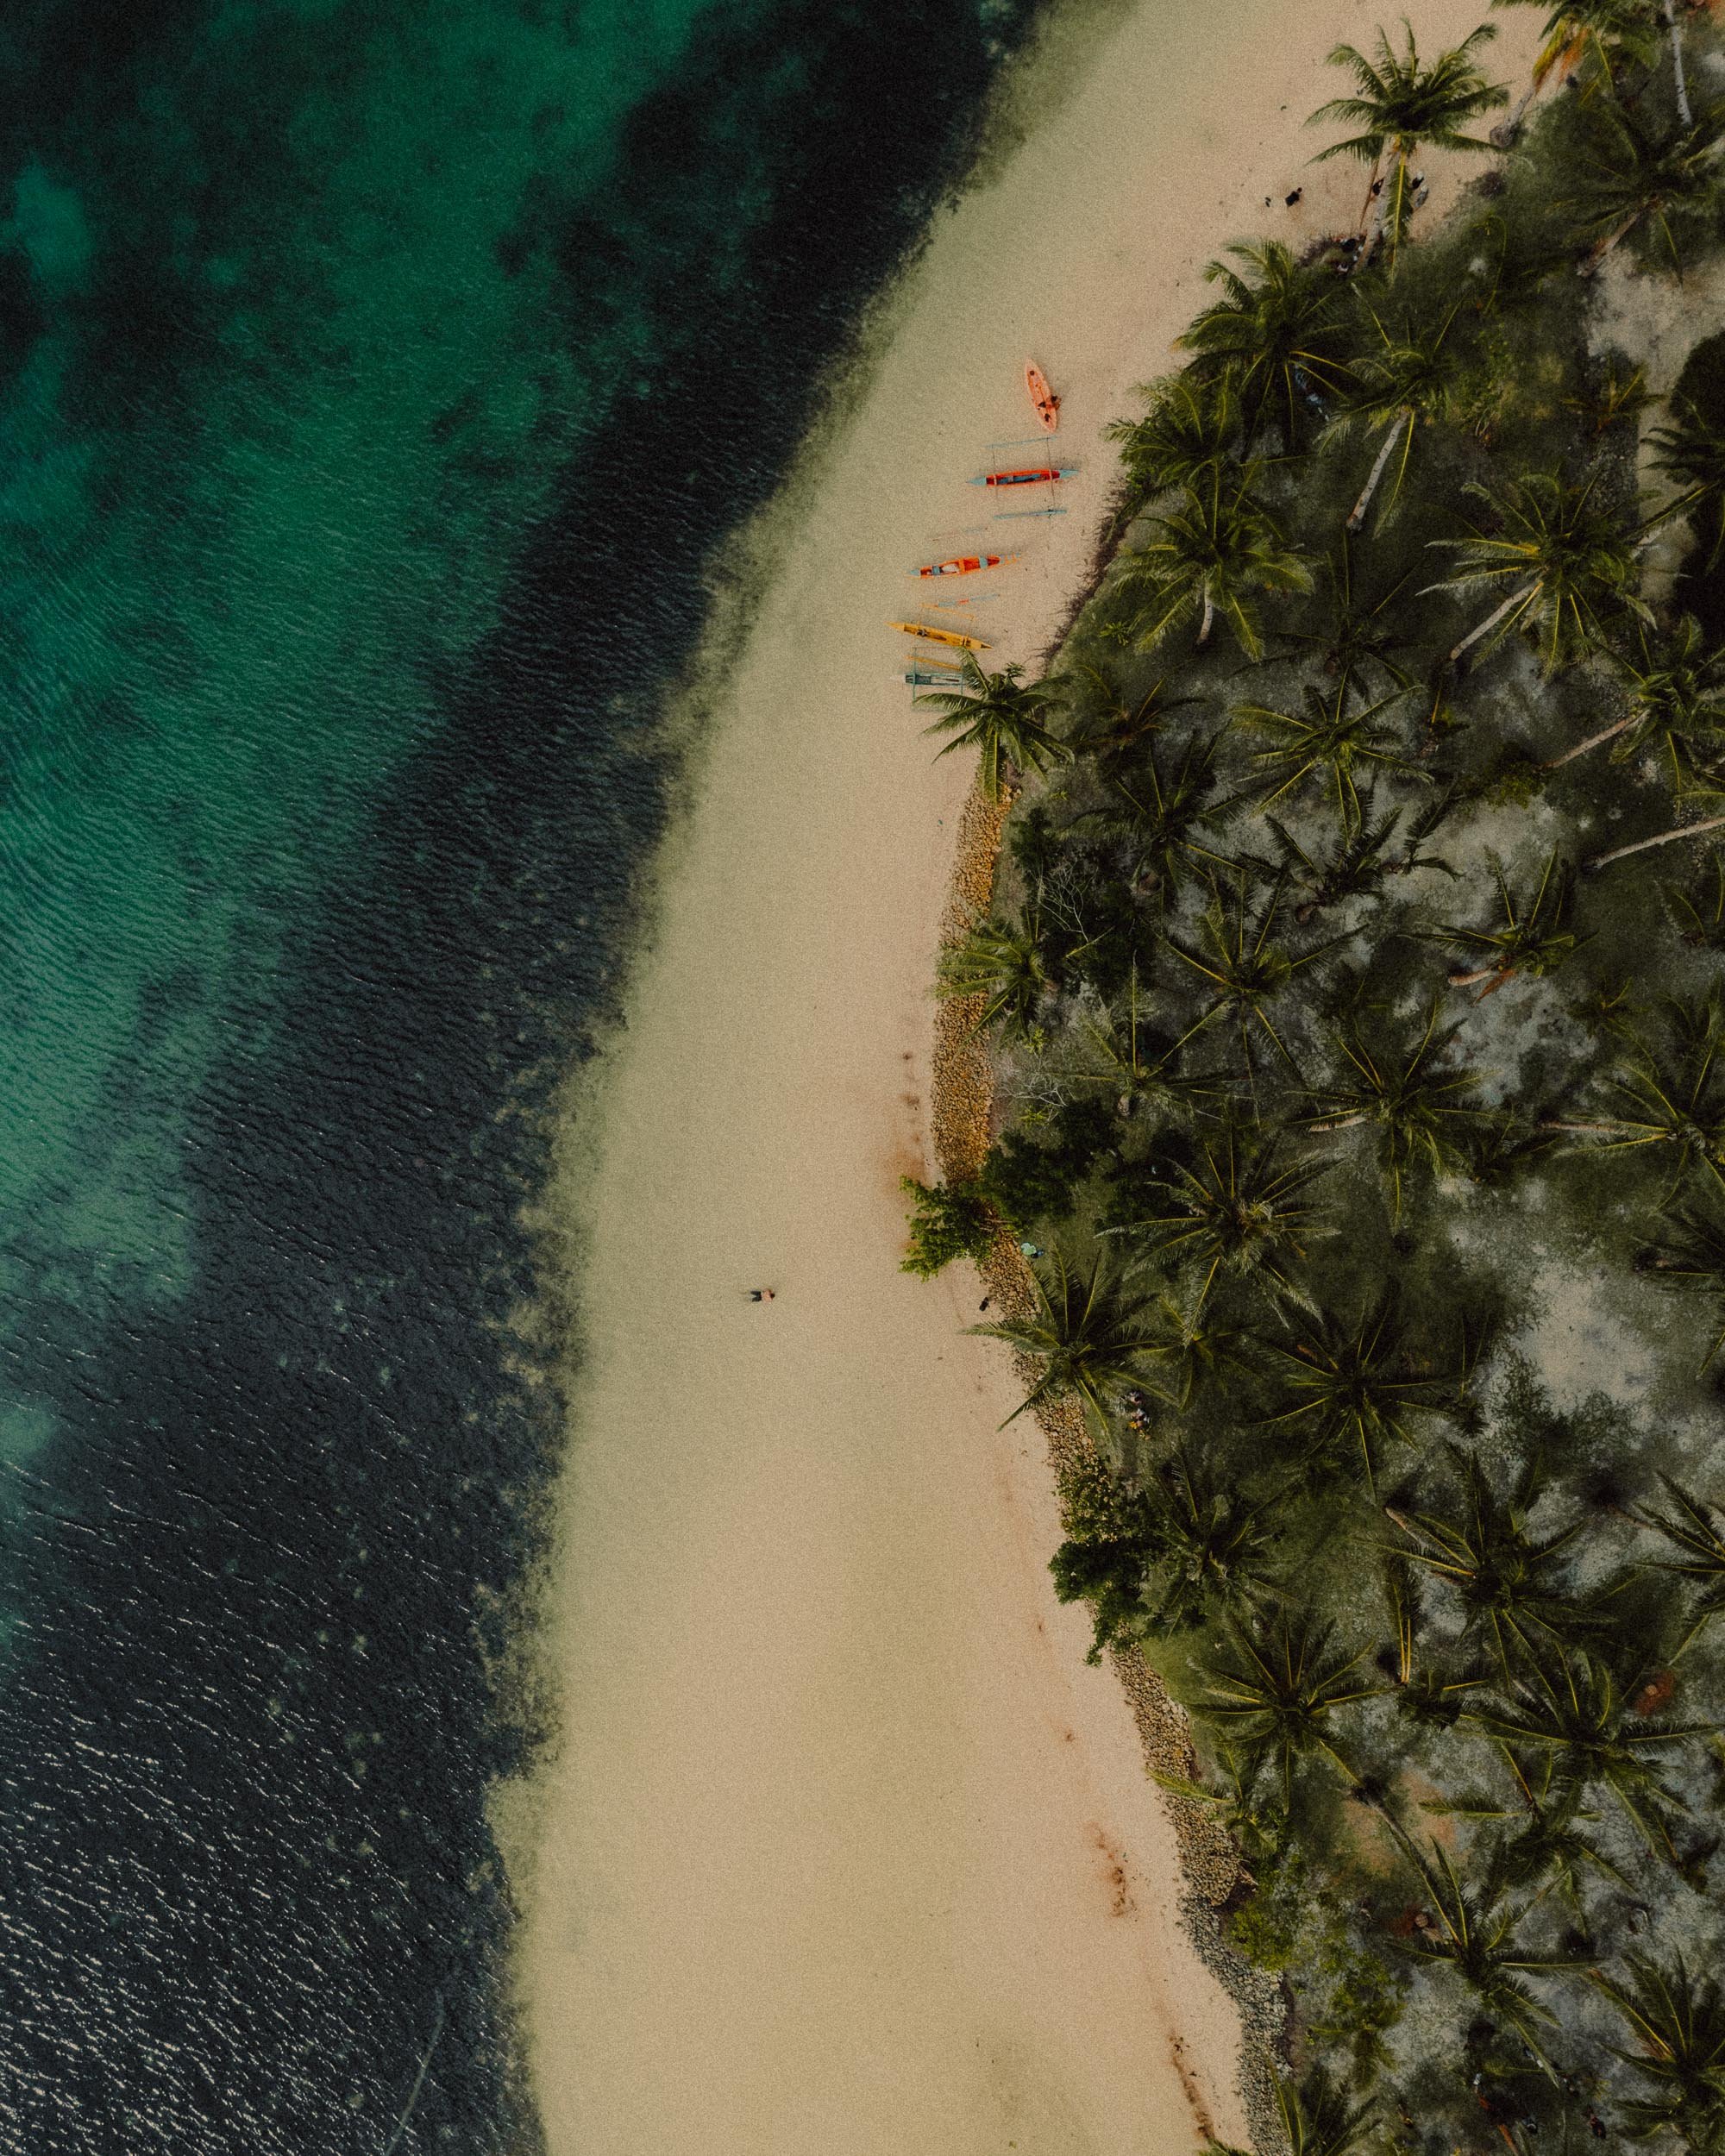 10-Siargao Drone Photography-A bird's-eye view aerial photo of Malinao Paradise, Siargao, Philippines, Southeast Asia, April 2022, Mavic 2 Pro, Hasselblad L1D-20c.jpg